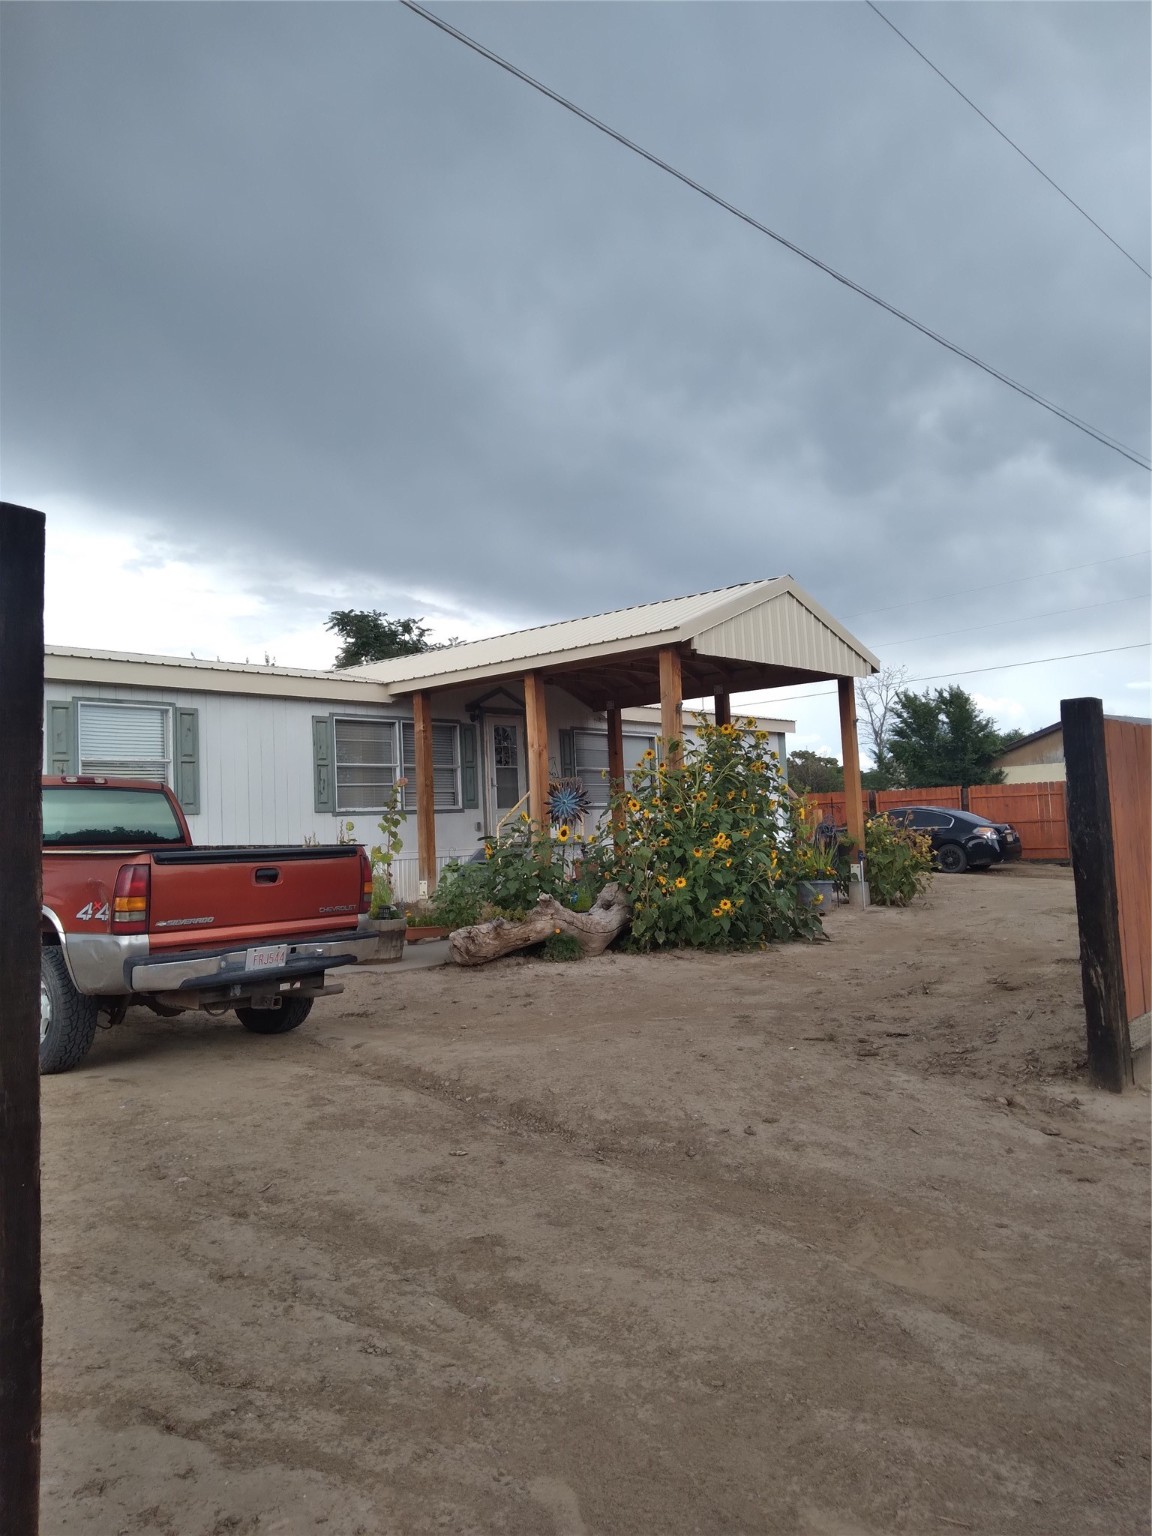 56 County Road 28, Chamita, New Mexico 87566, 4 Bedrooms Bedrooms, ,2 BathroomsBathrooms,Residential,For Sale,56 County Road 28,202233095